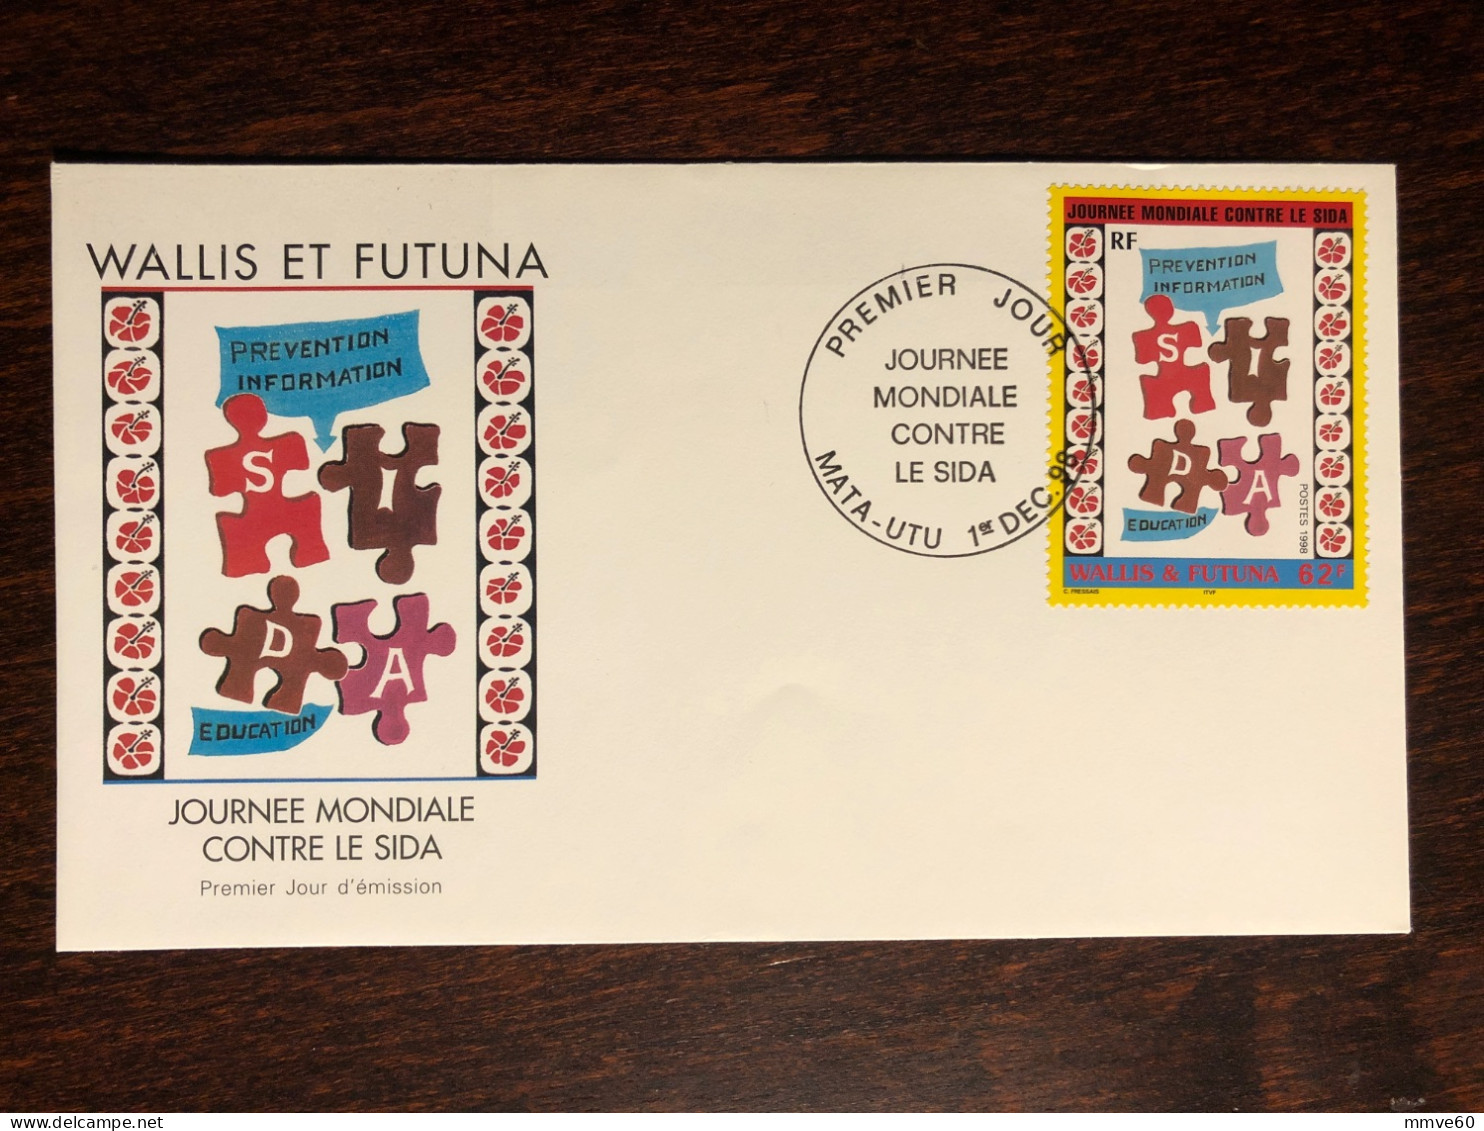 WALLIS & FUTUNA FDC COVER 1998 YEAR AIDS SIDA HEALTH MEDICINE STAMPS - Covers & Documents